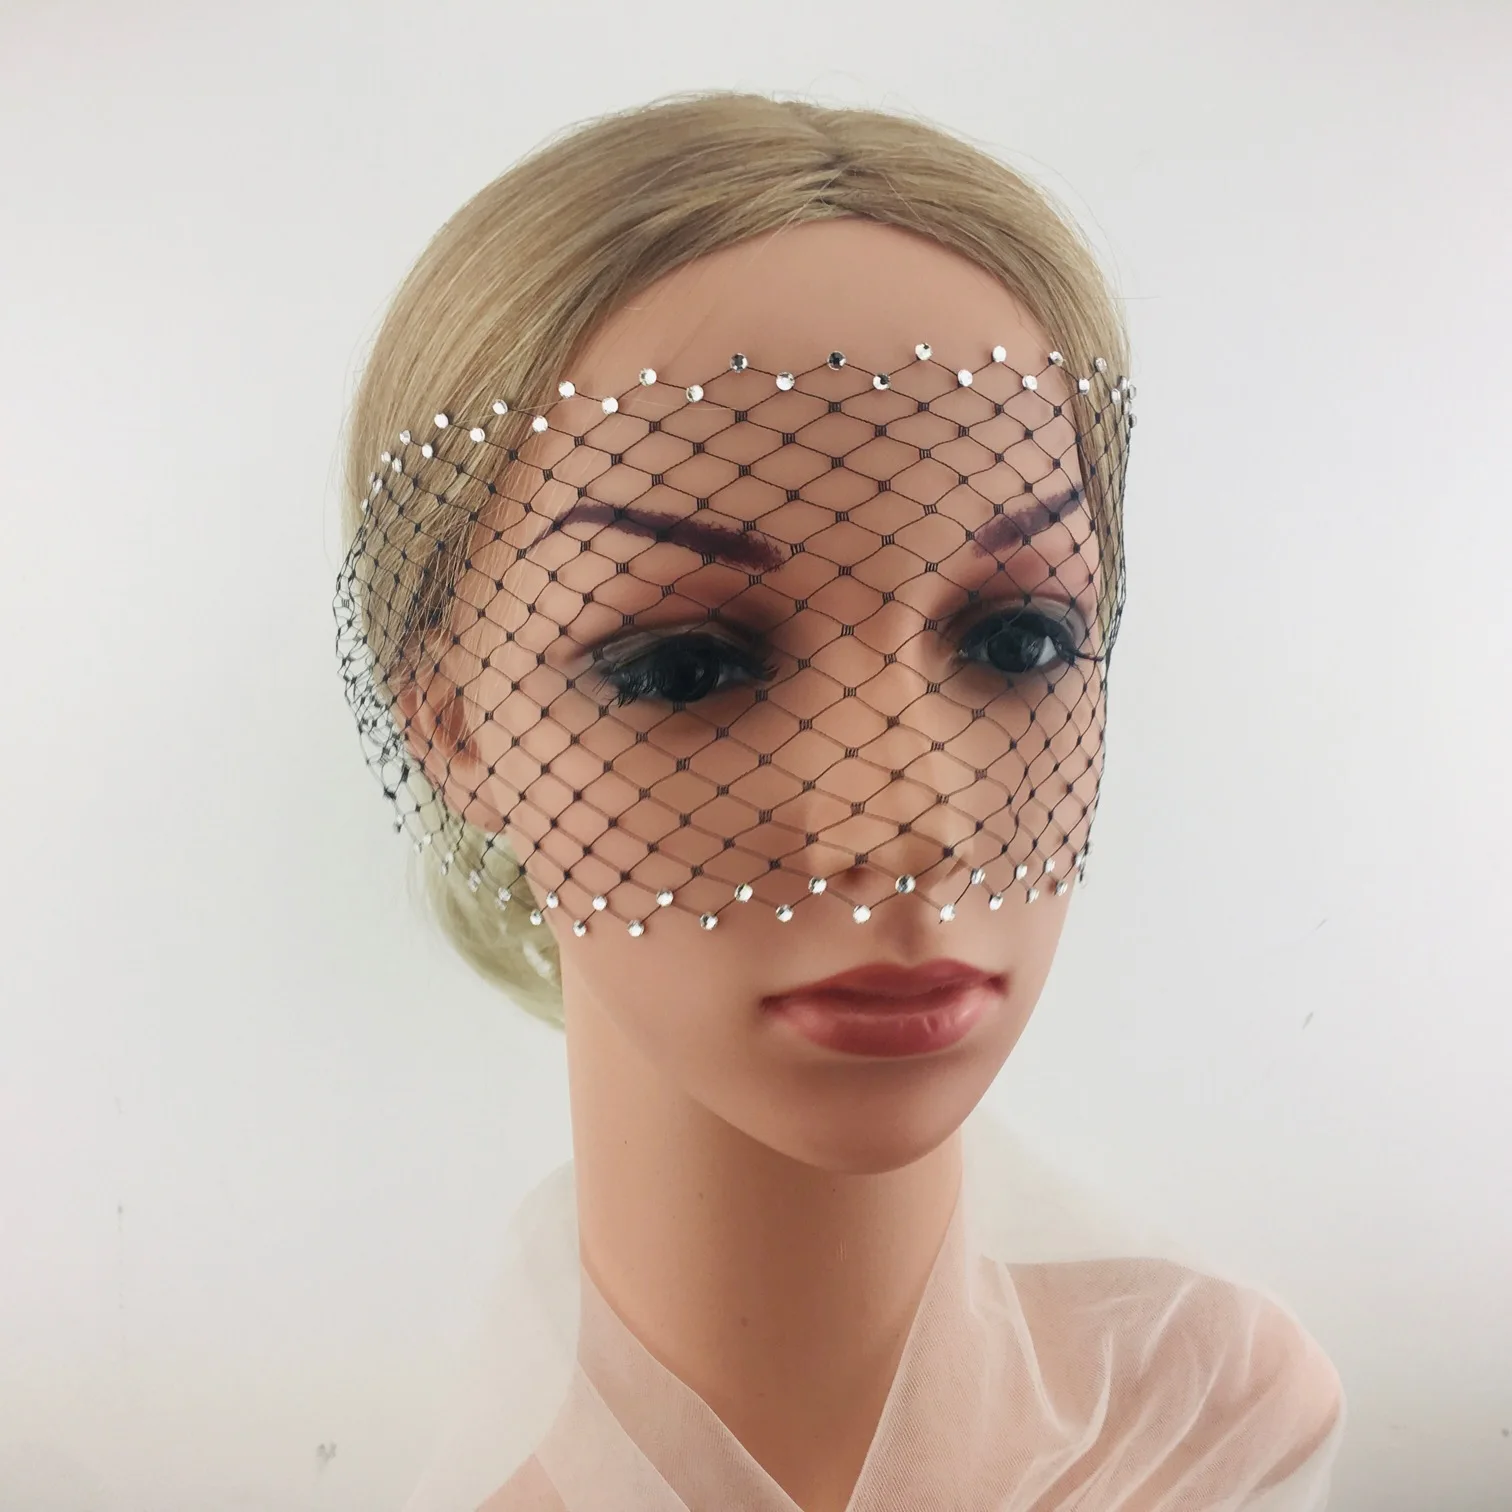 

Black Drill Face Mask For Bride Headwear Net Birdcage Veils Elegant Charming Wedding Hair Accessories Hairband for Wedding Party